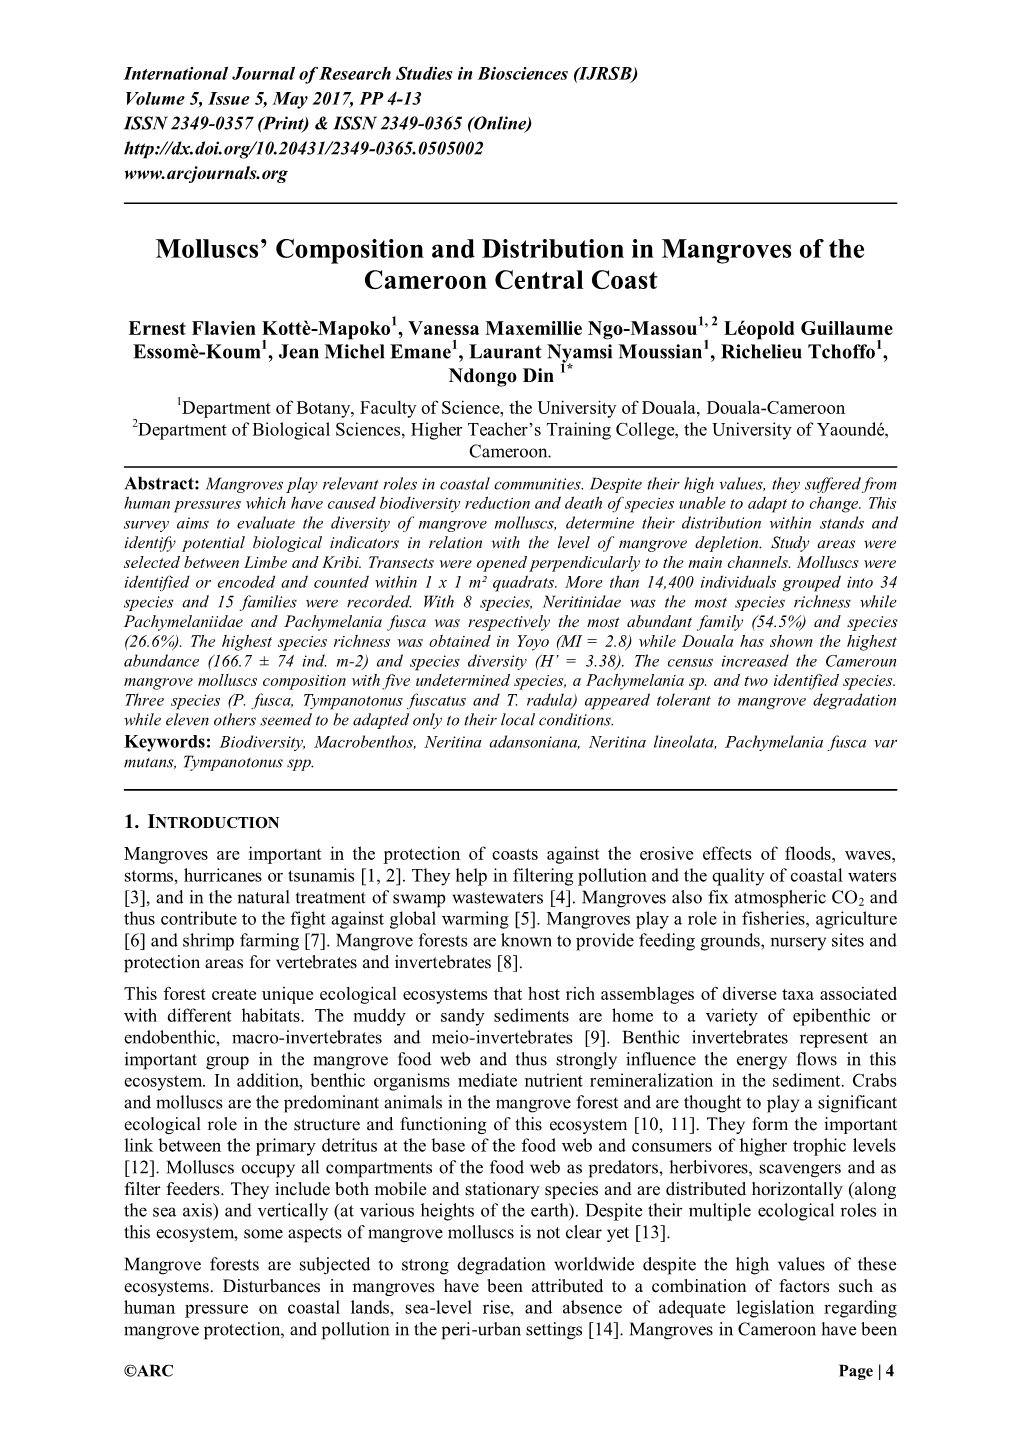 Molluscs' Composition and Distribution in Mangroves of The